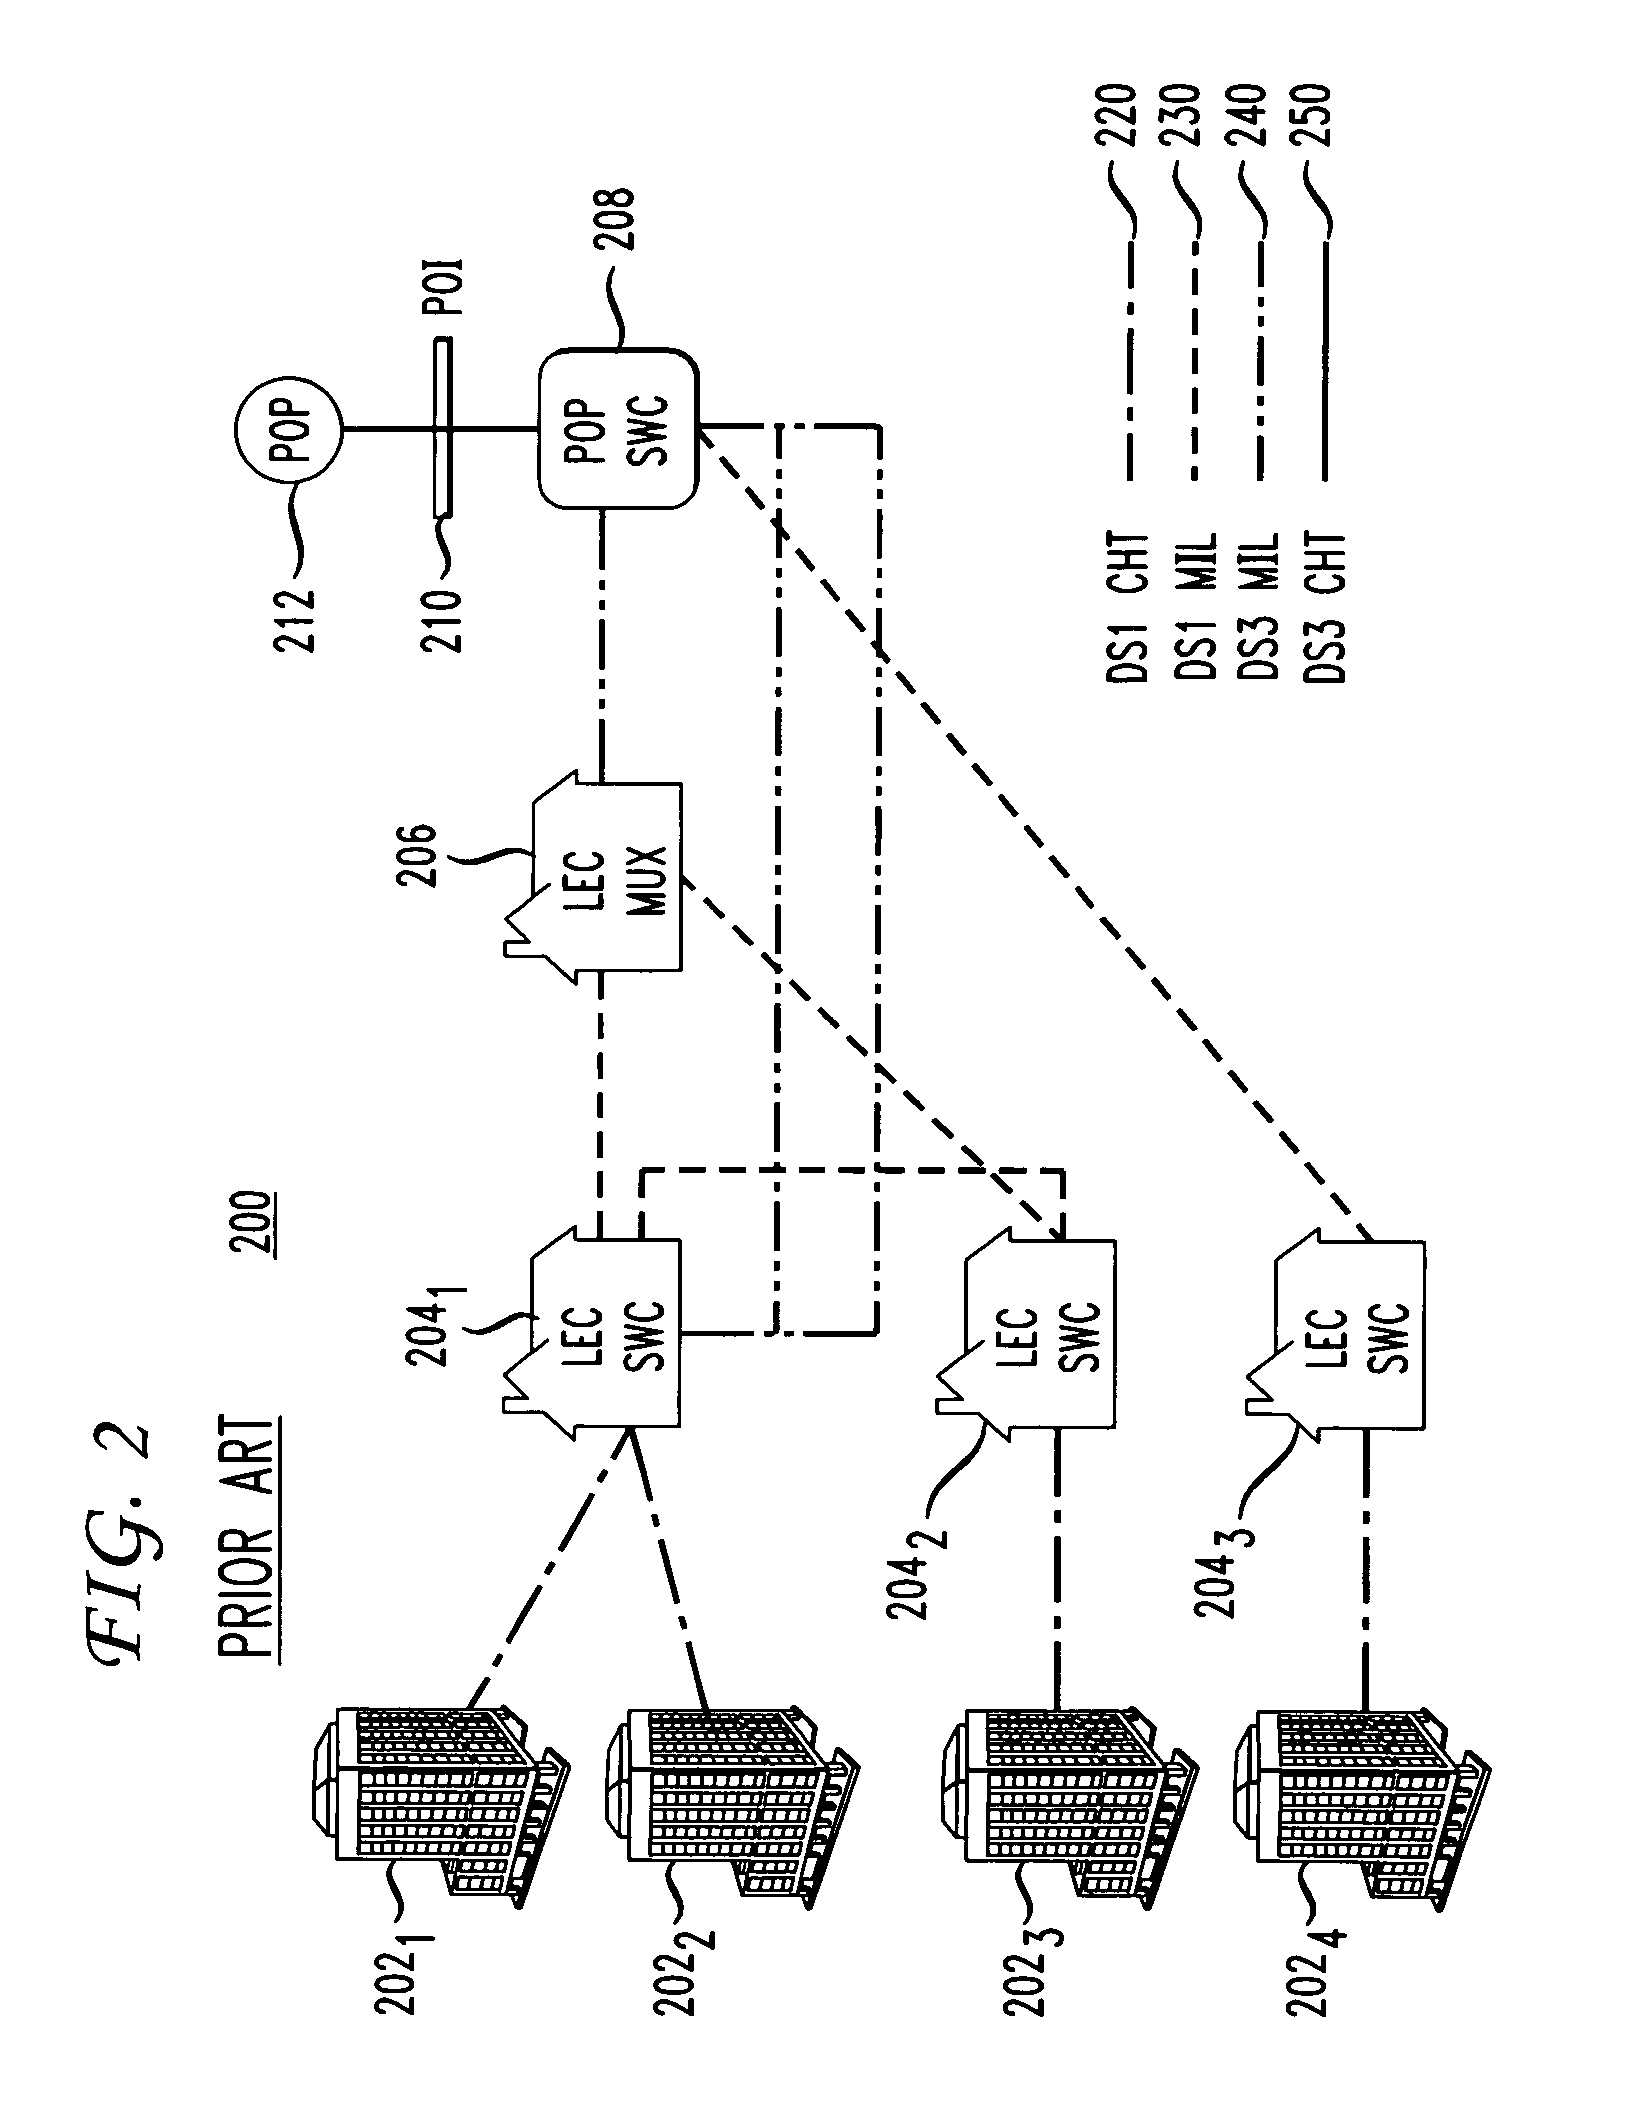 Method and apparatus for joint optimization of dedicated and radio access networks